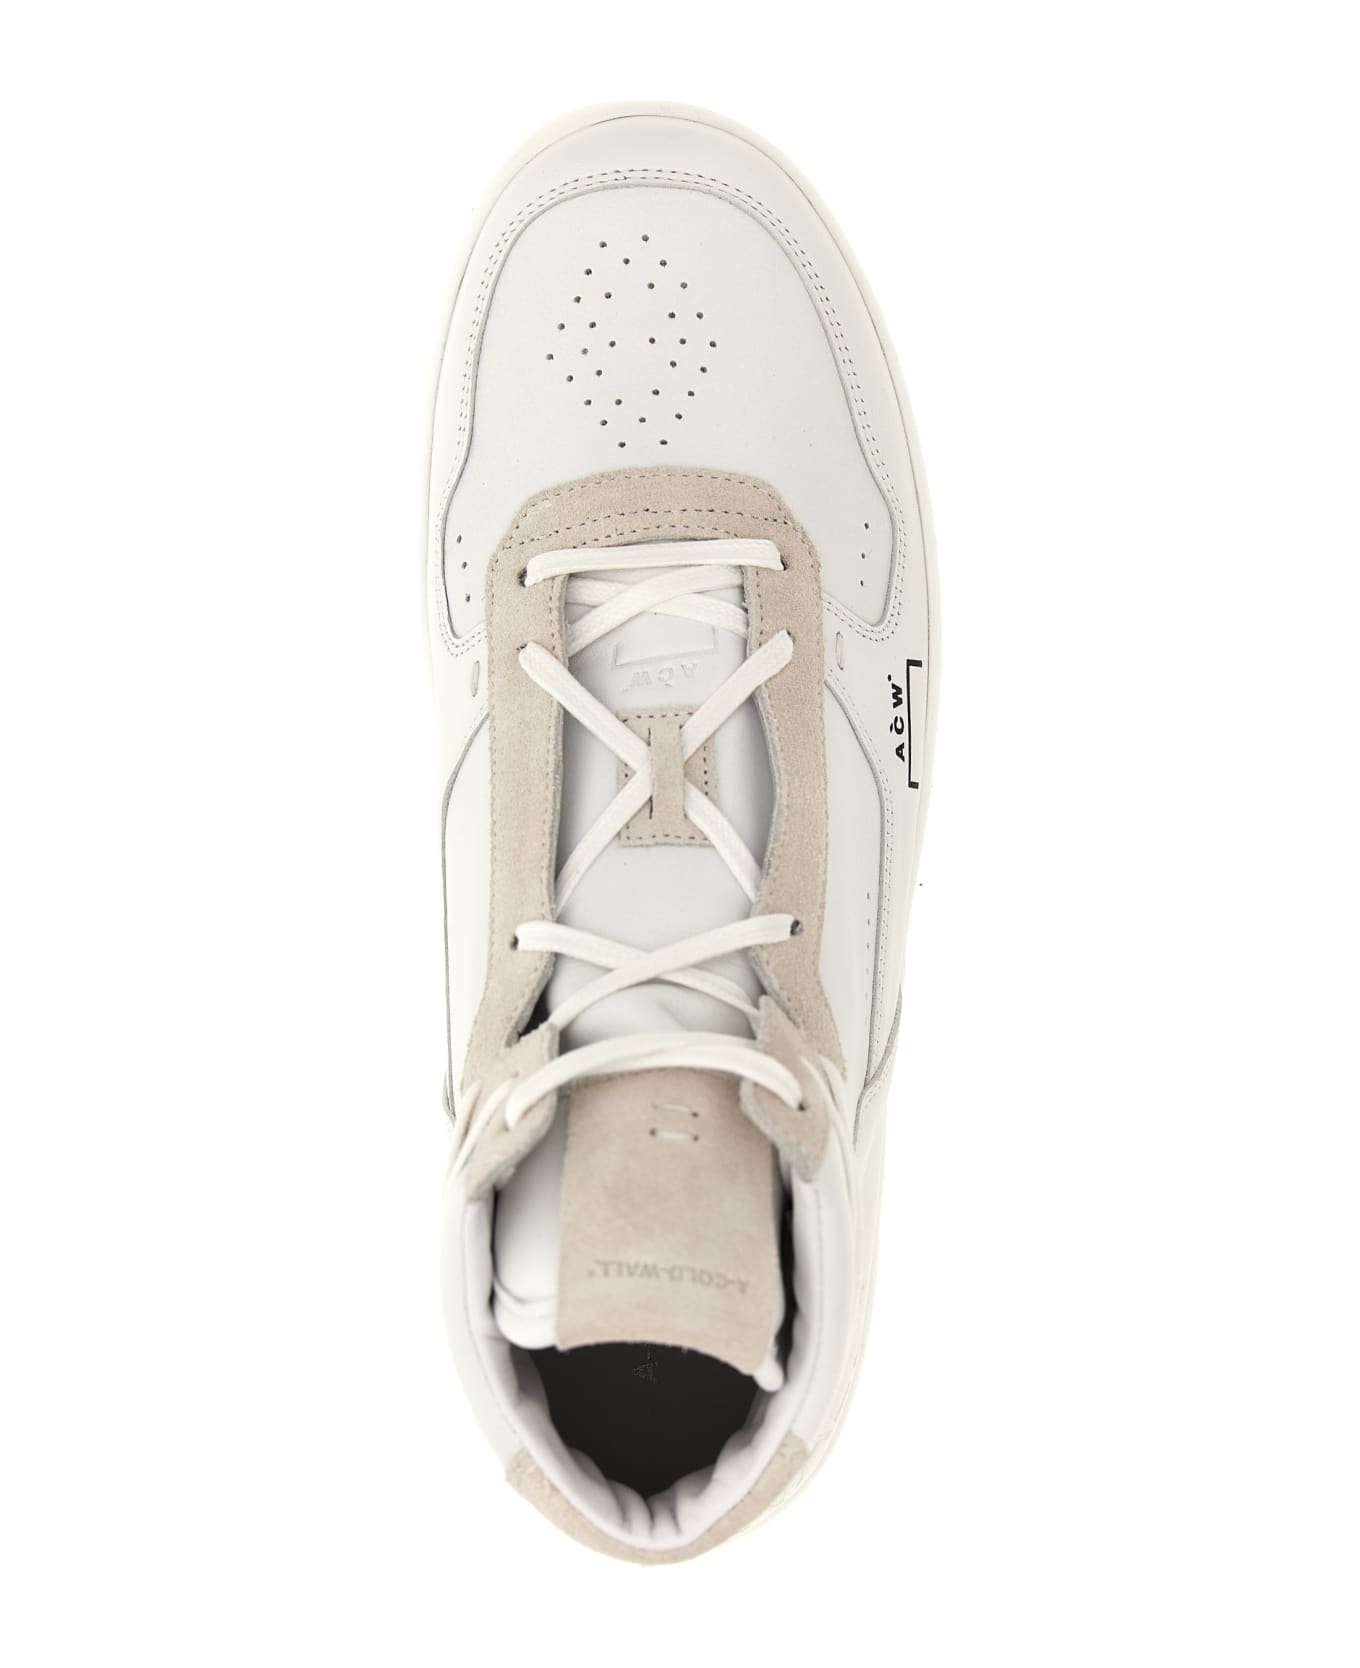 A-COLD-WALL 'luol Hi Top' Sneakers - White スニーカー